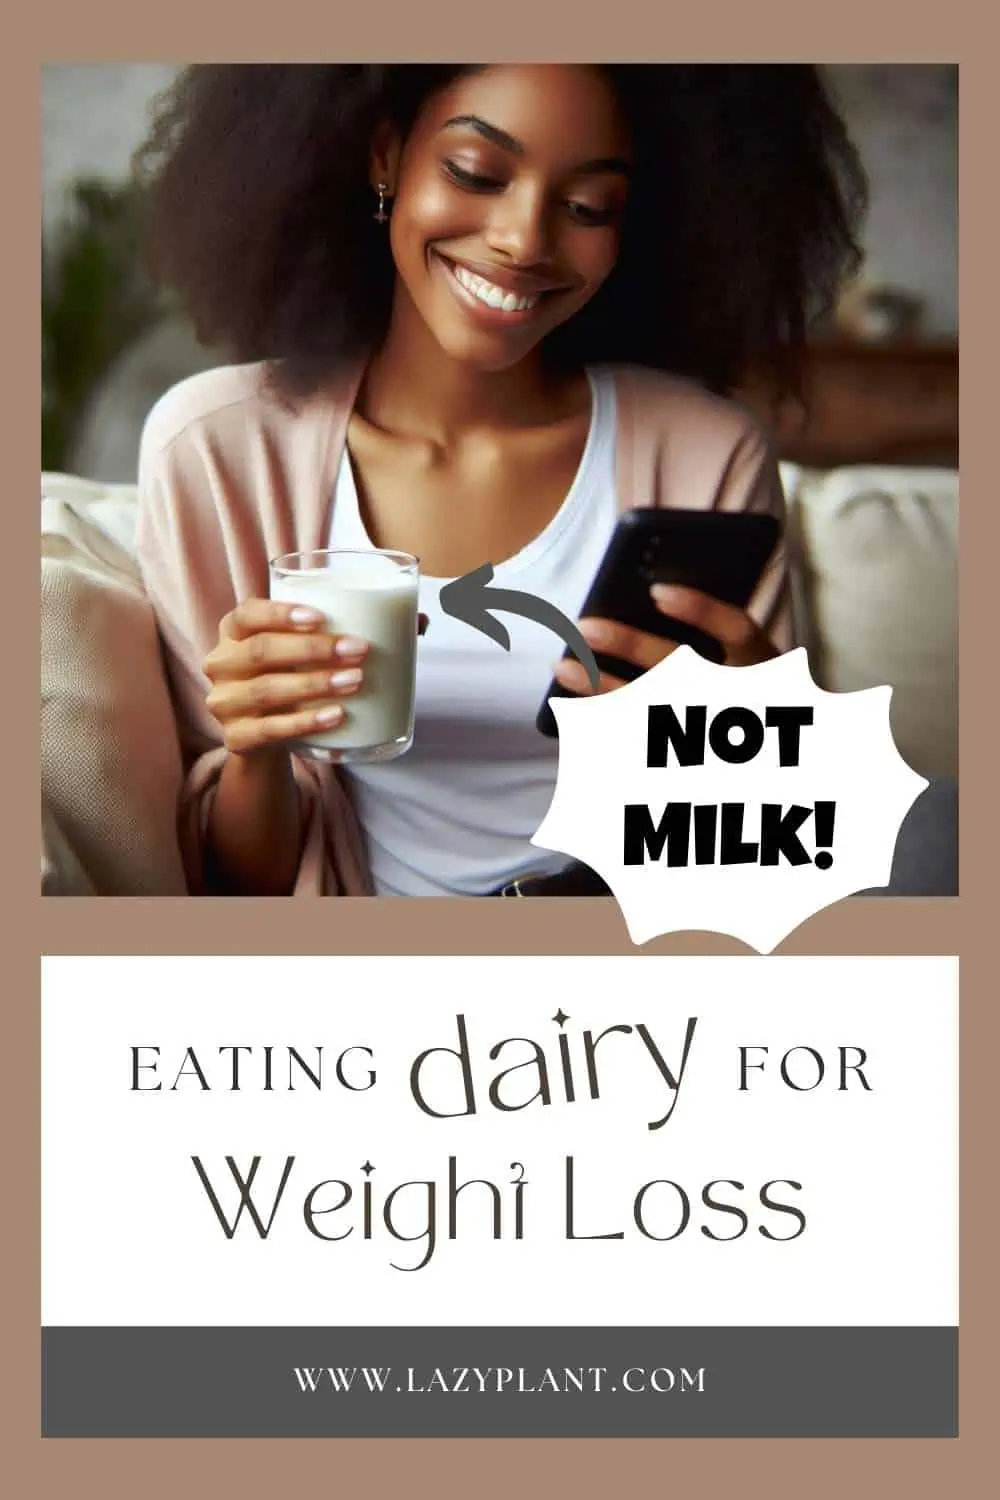 Diet tips: Milk, Yogurt, Kefir, or Cottage cheese for Weight Loss?